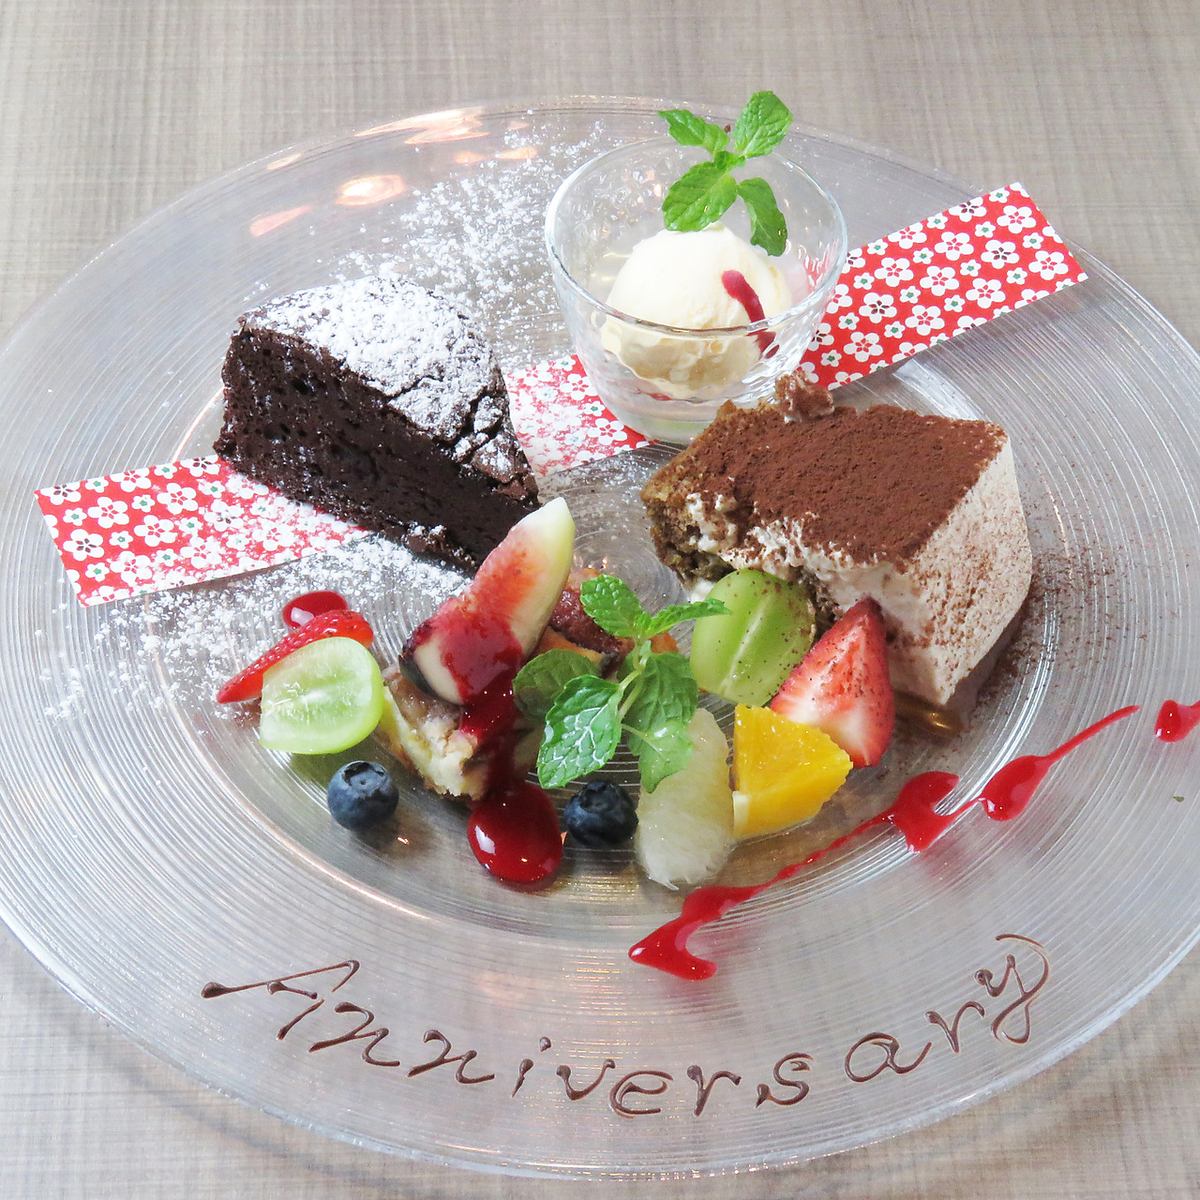 We will include a message plate on your anniversary◎